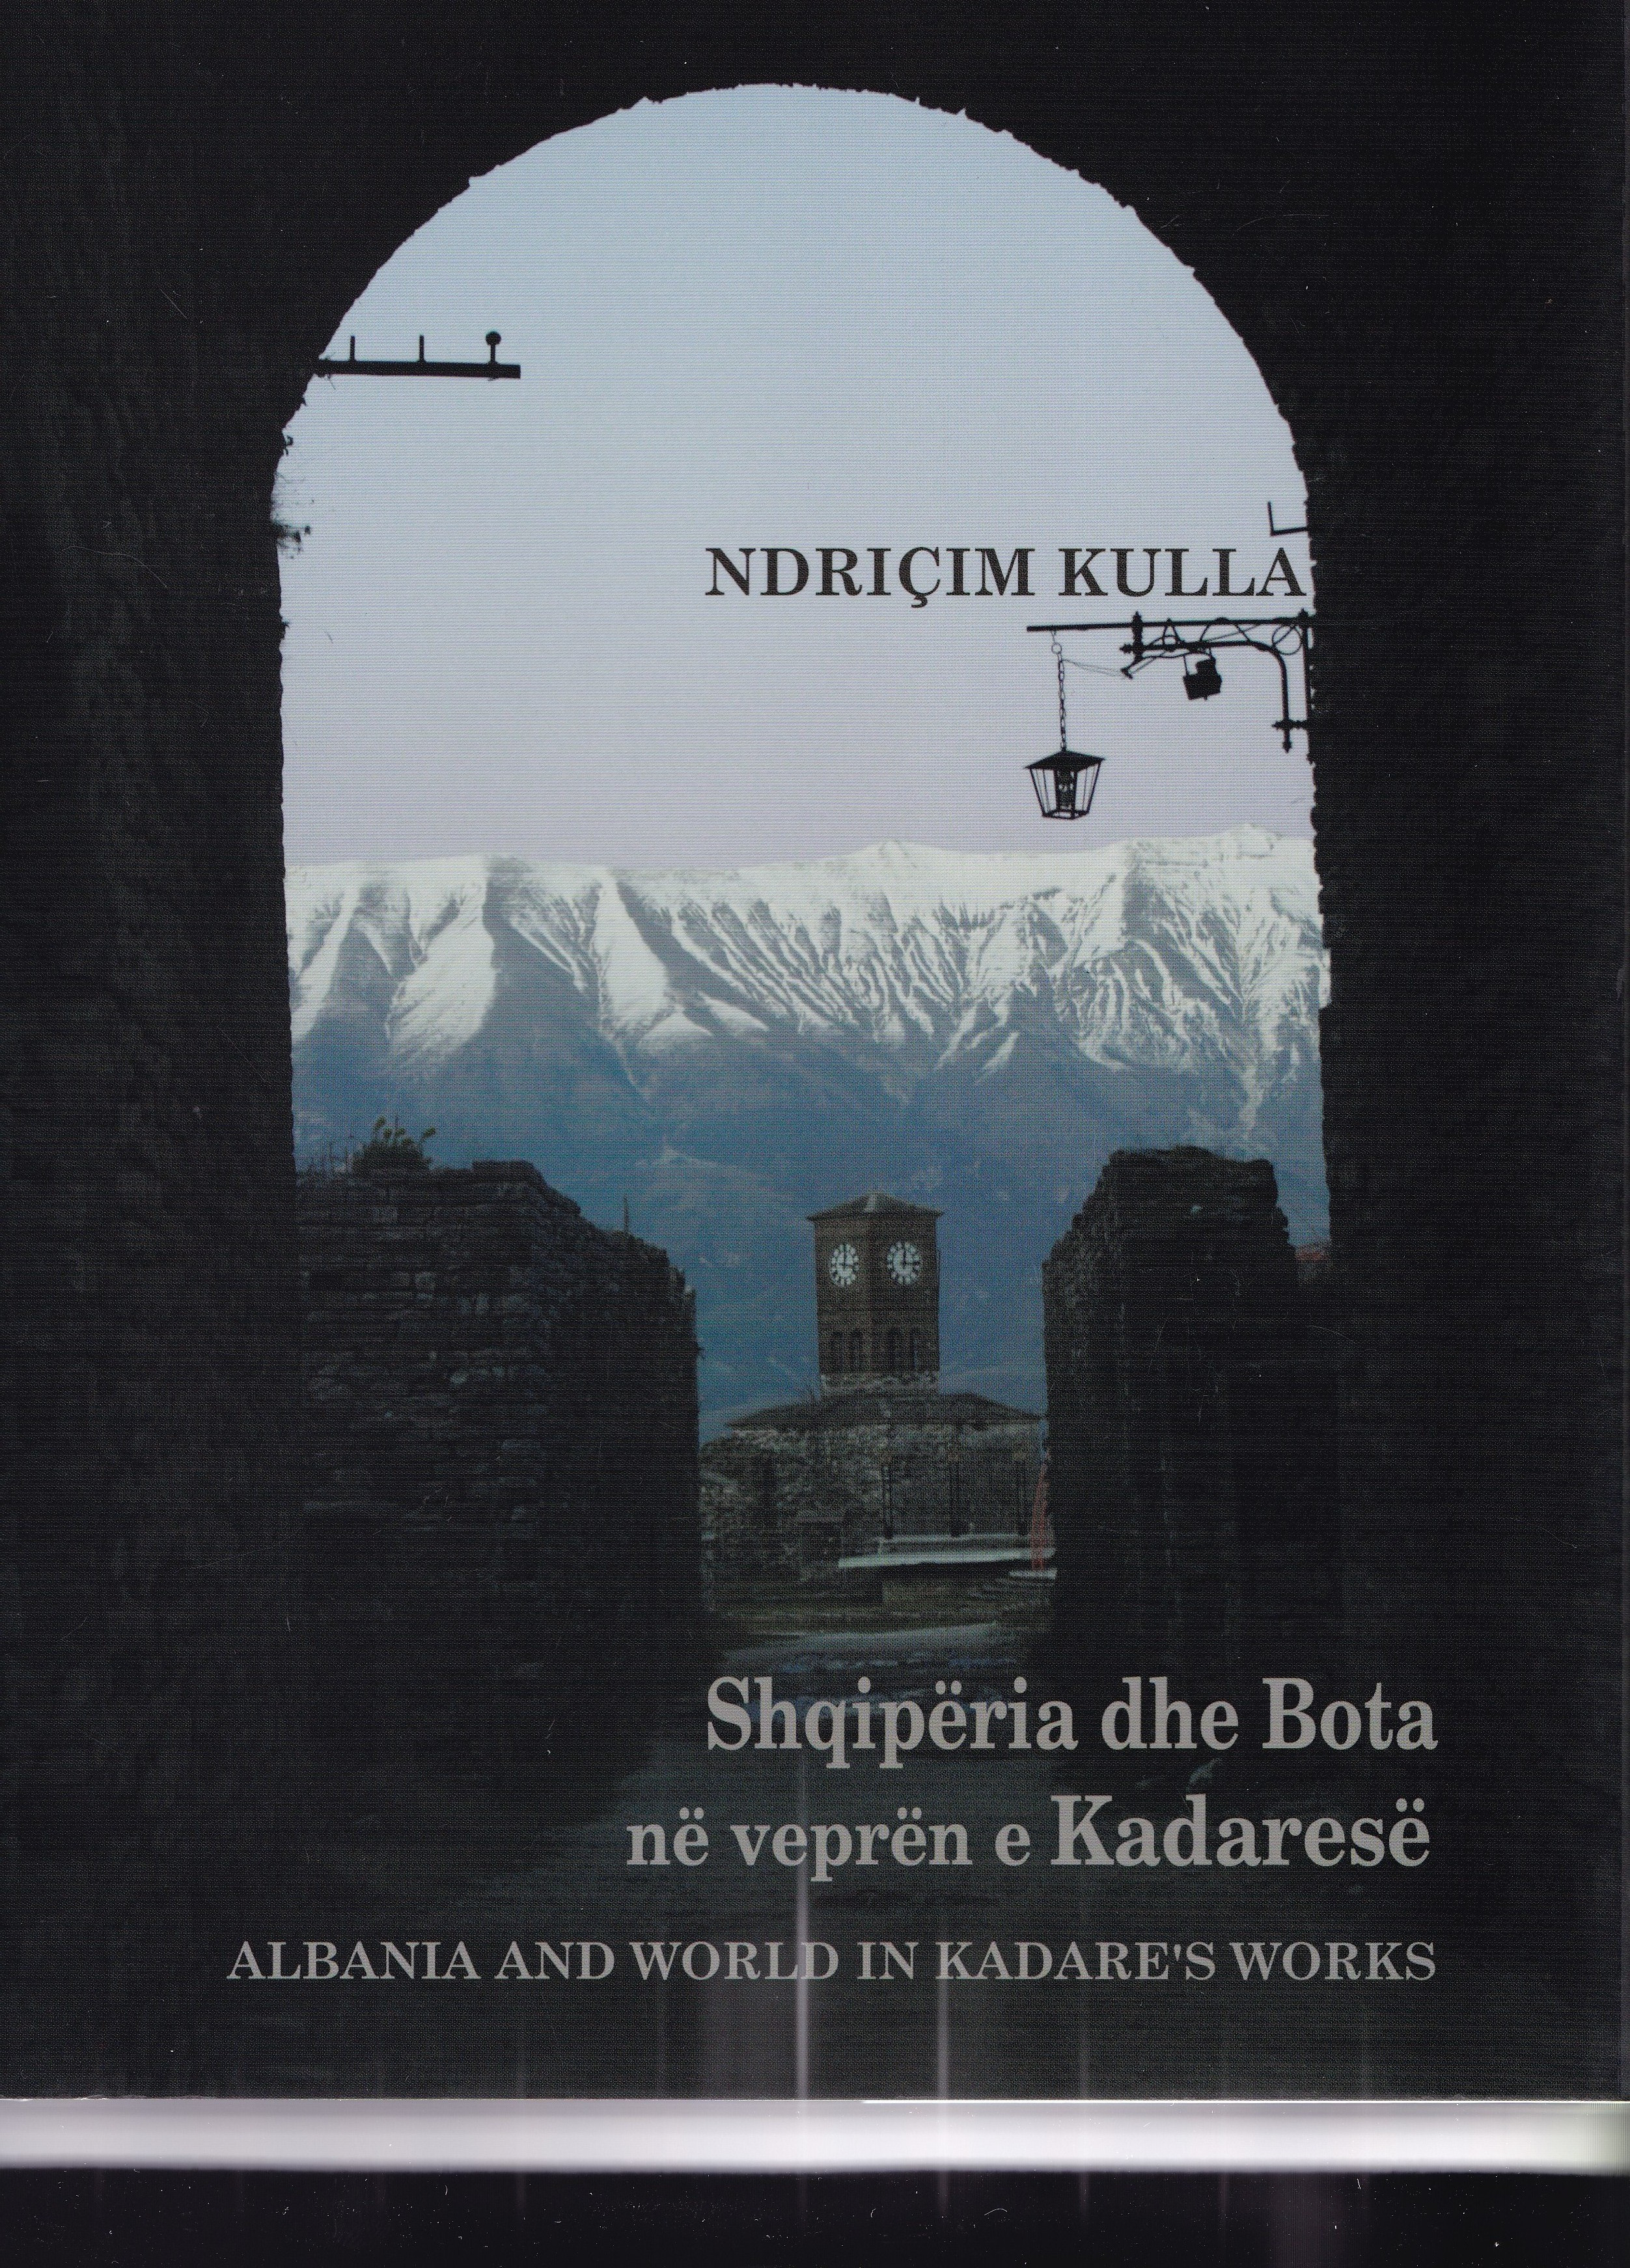 Albania and world in Kadare's works